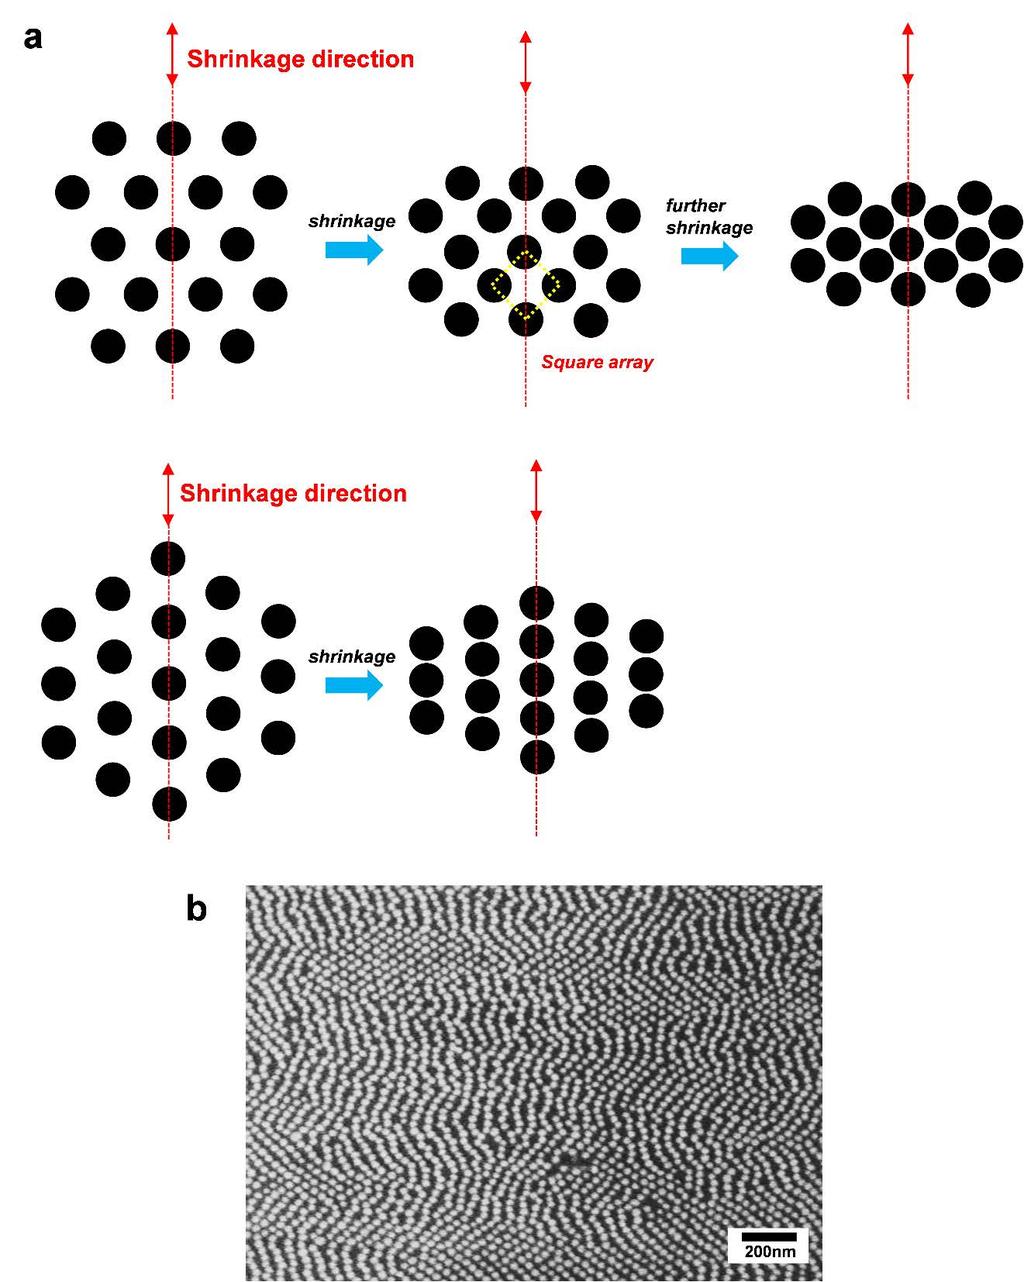 Supplementary Figure 12 a, Morphological change of nanoparticle arrays with 6-fold symmetry depending on the shrinkage direction and grain orientation.